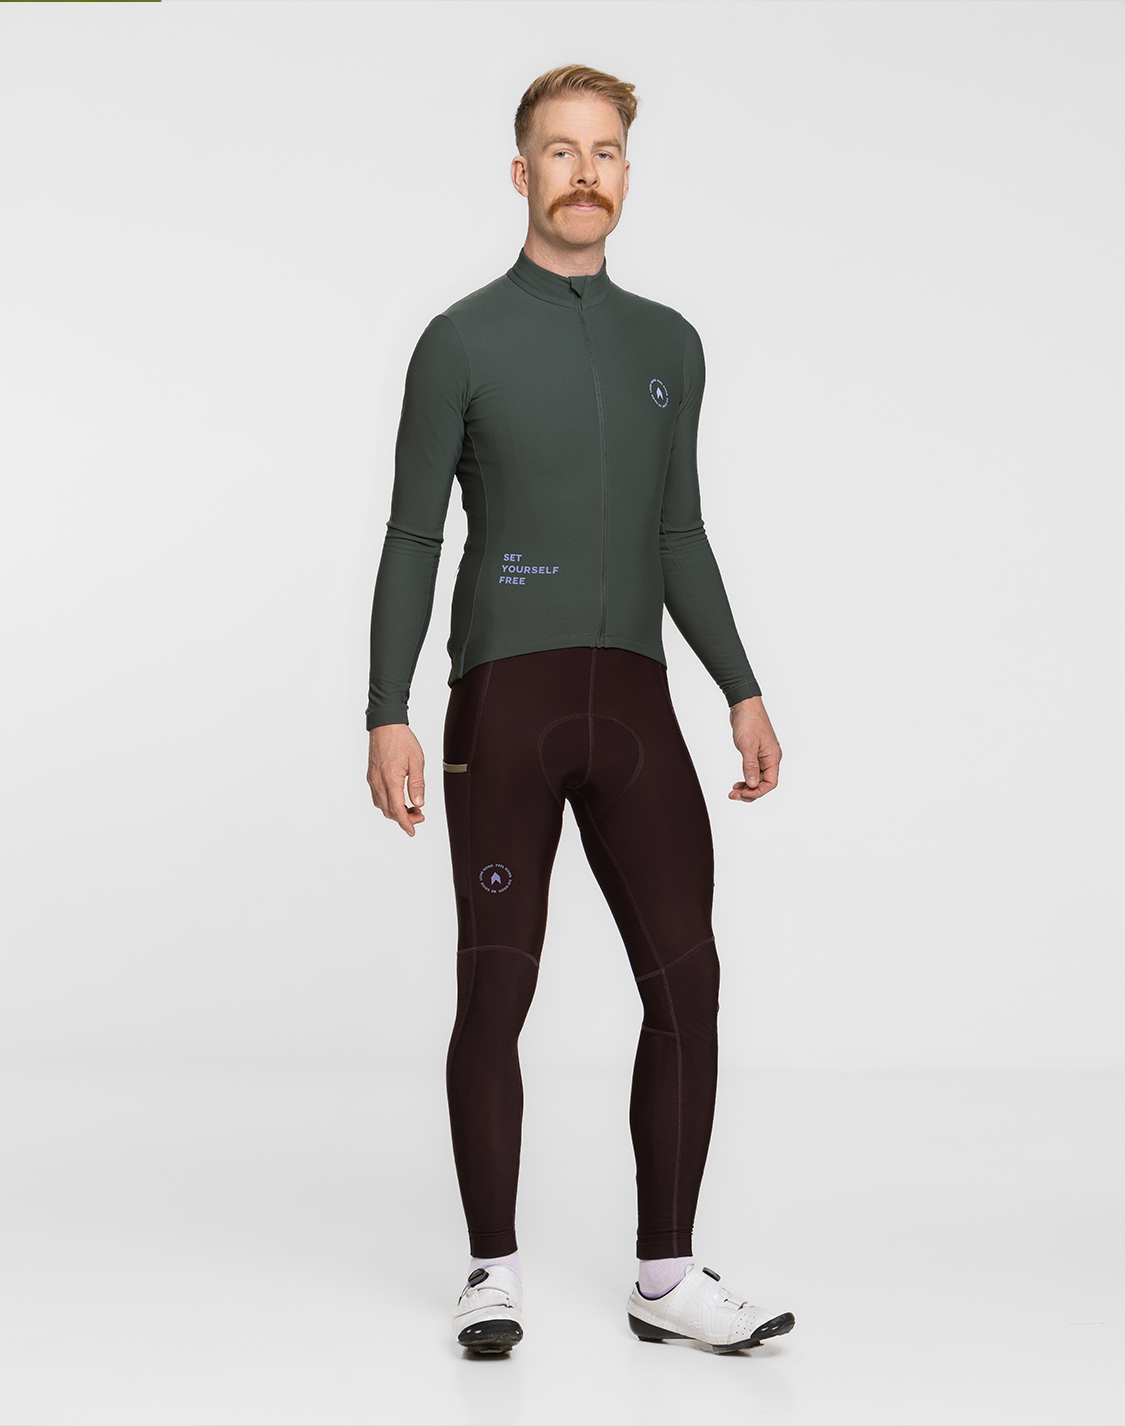 Men's Set Yourself Free Thermal Jersey — Ash Forest